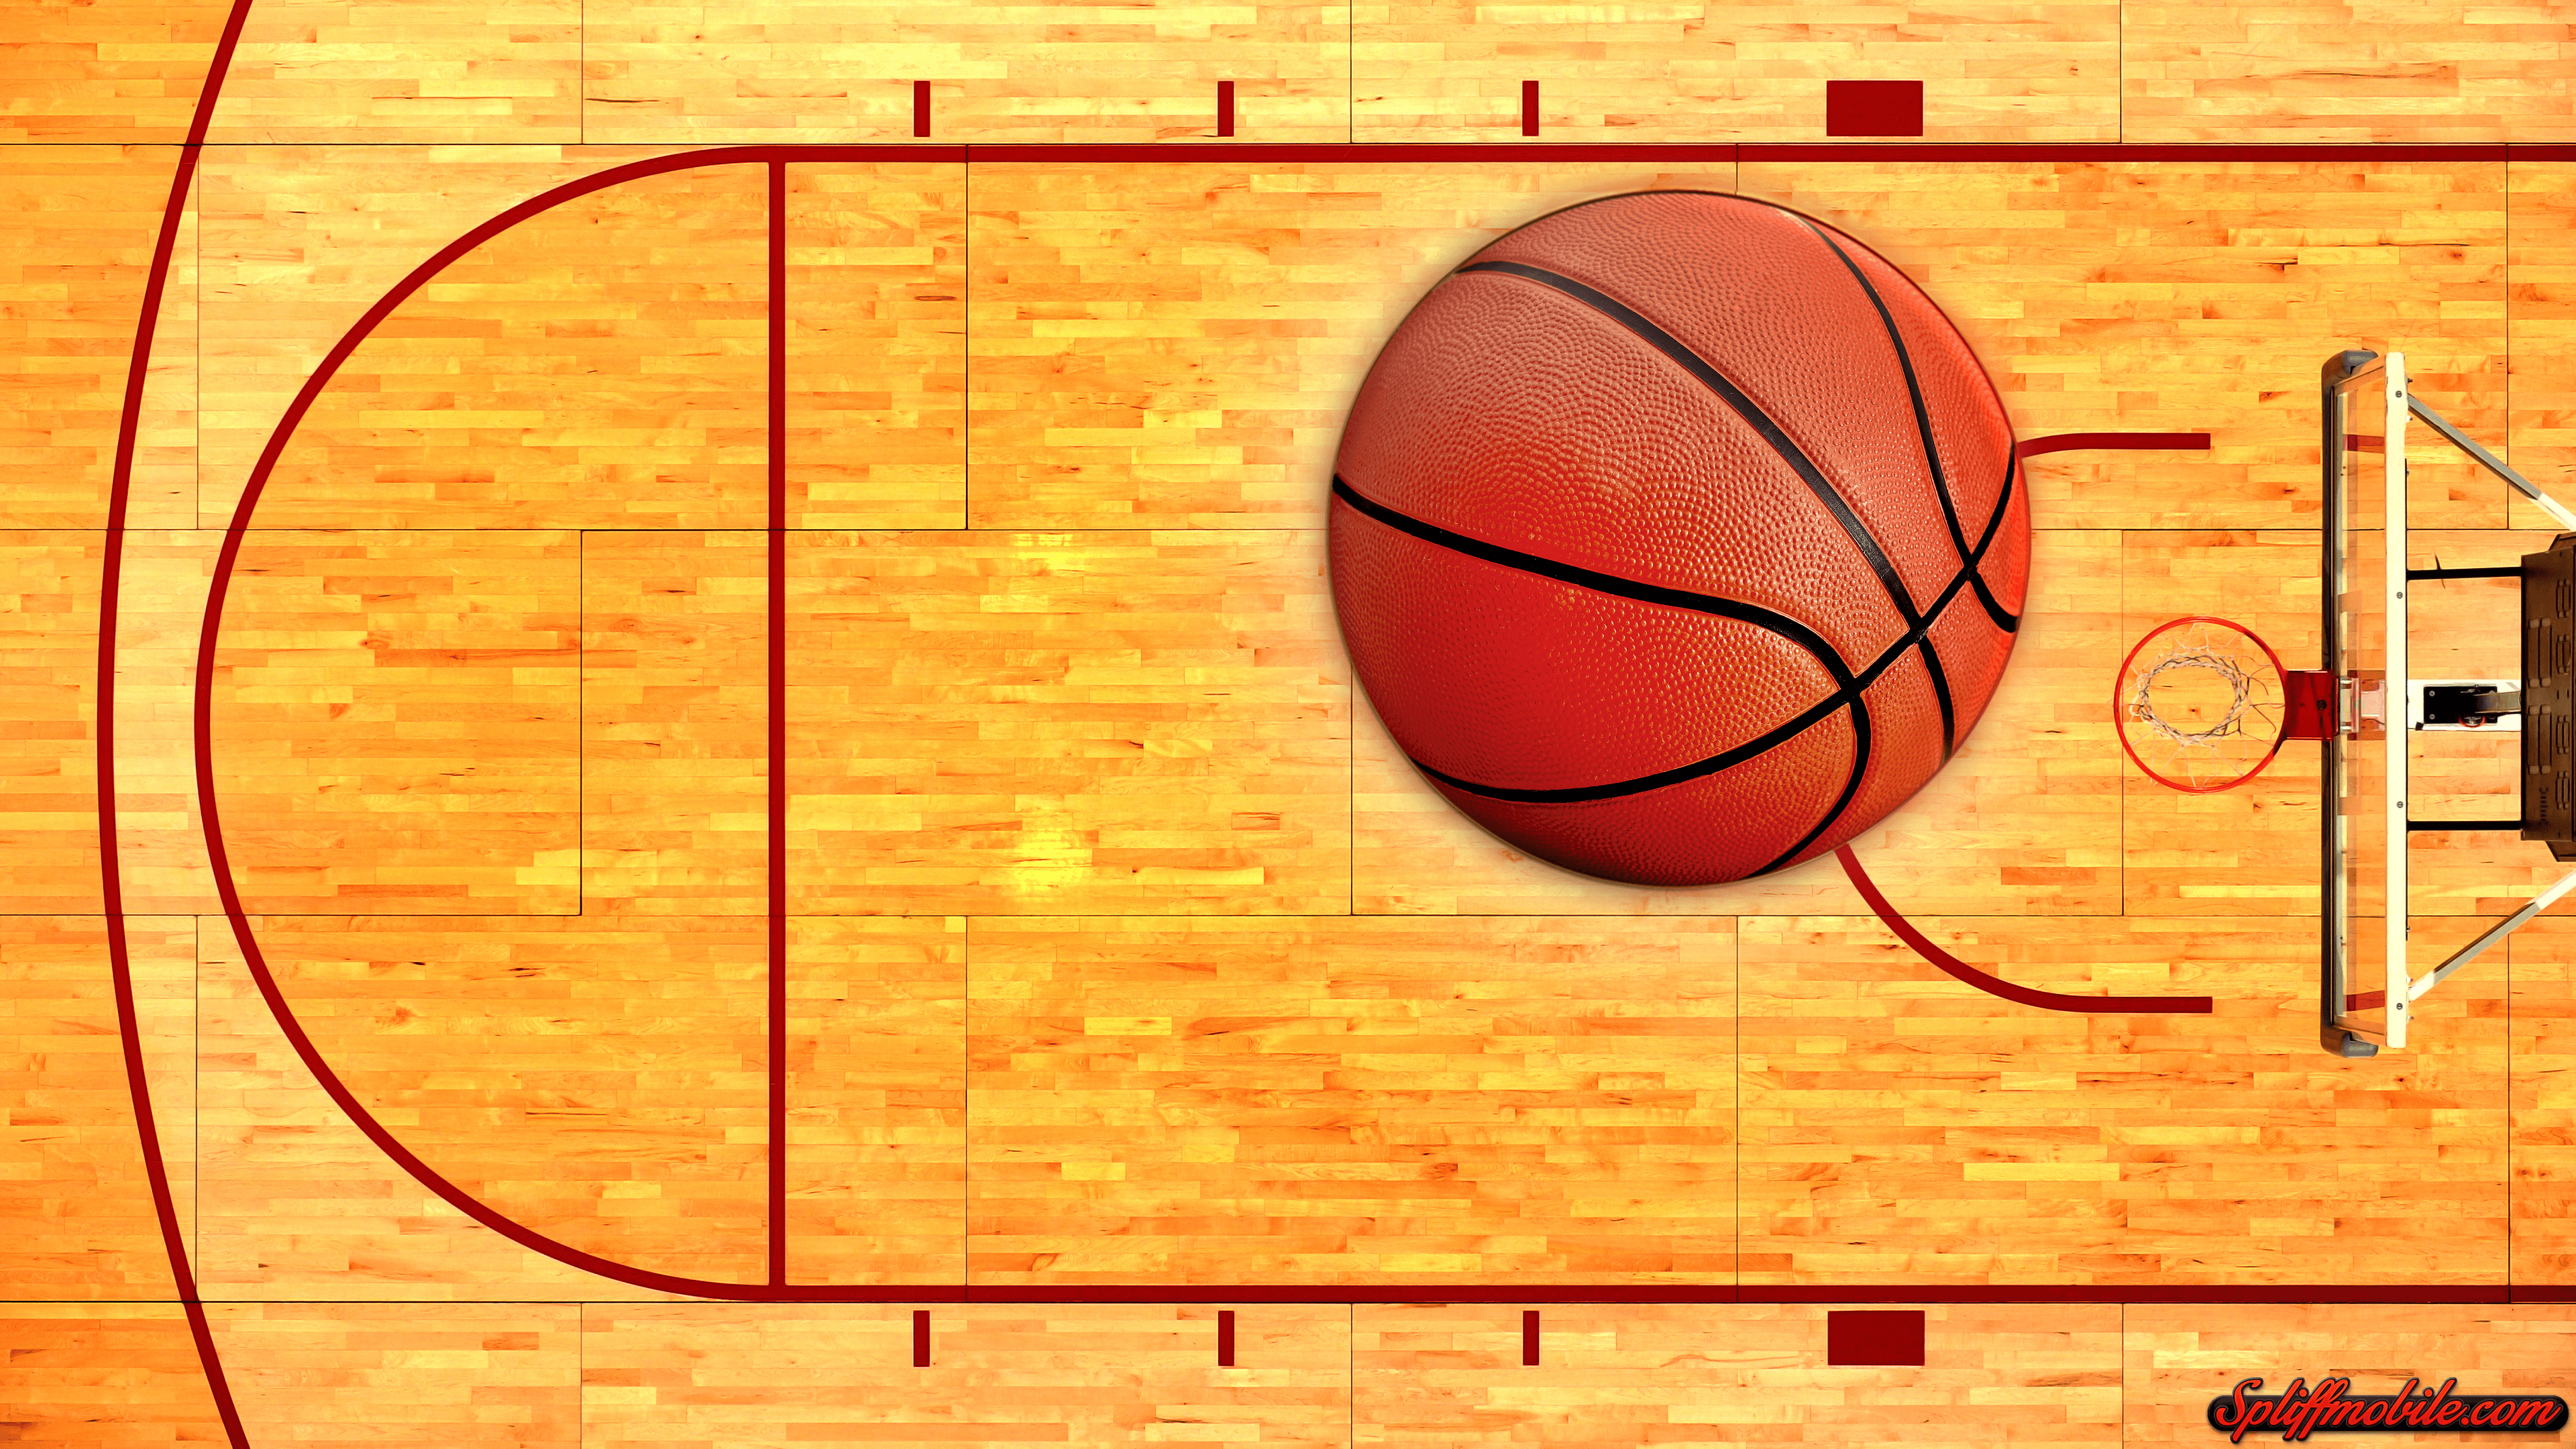 500 Basketball Court Pictures  Download Free Images on Unsplash  Basketball  court pictures Court pictures Basketball court